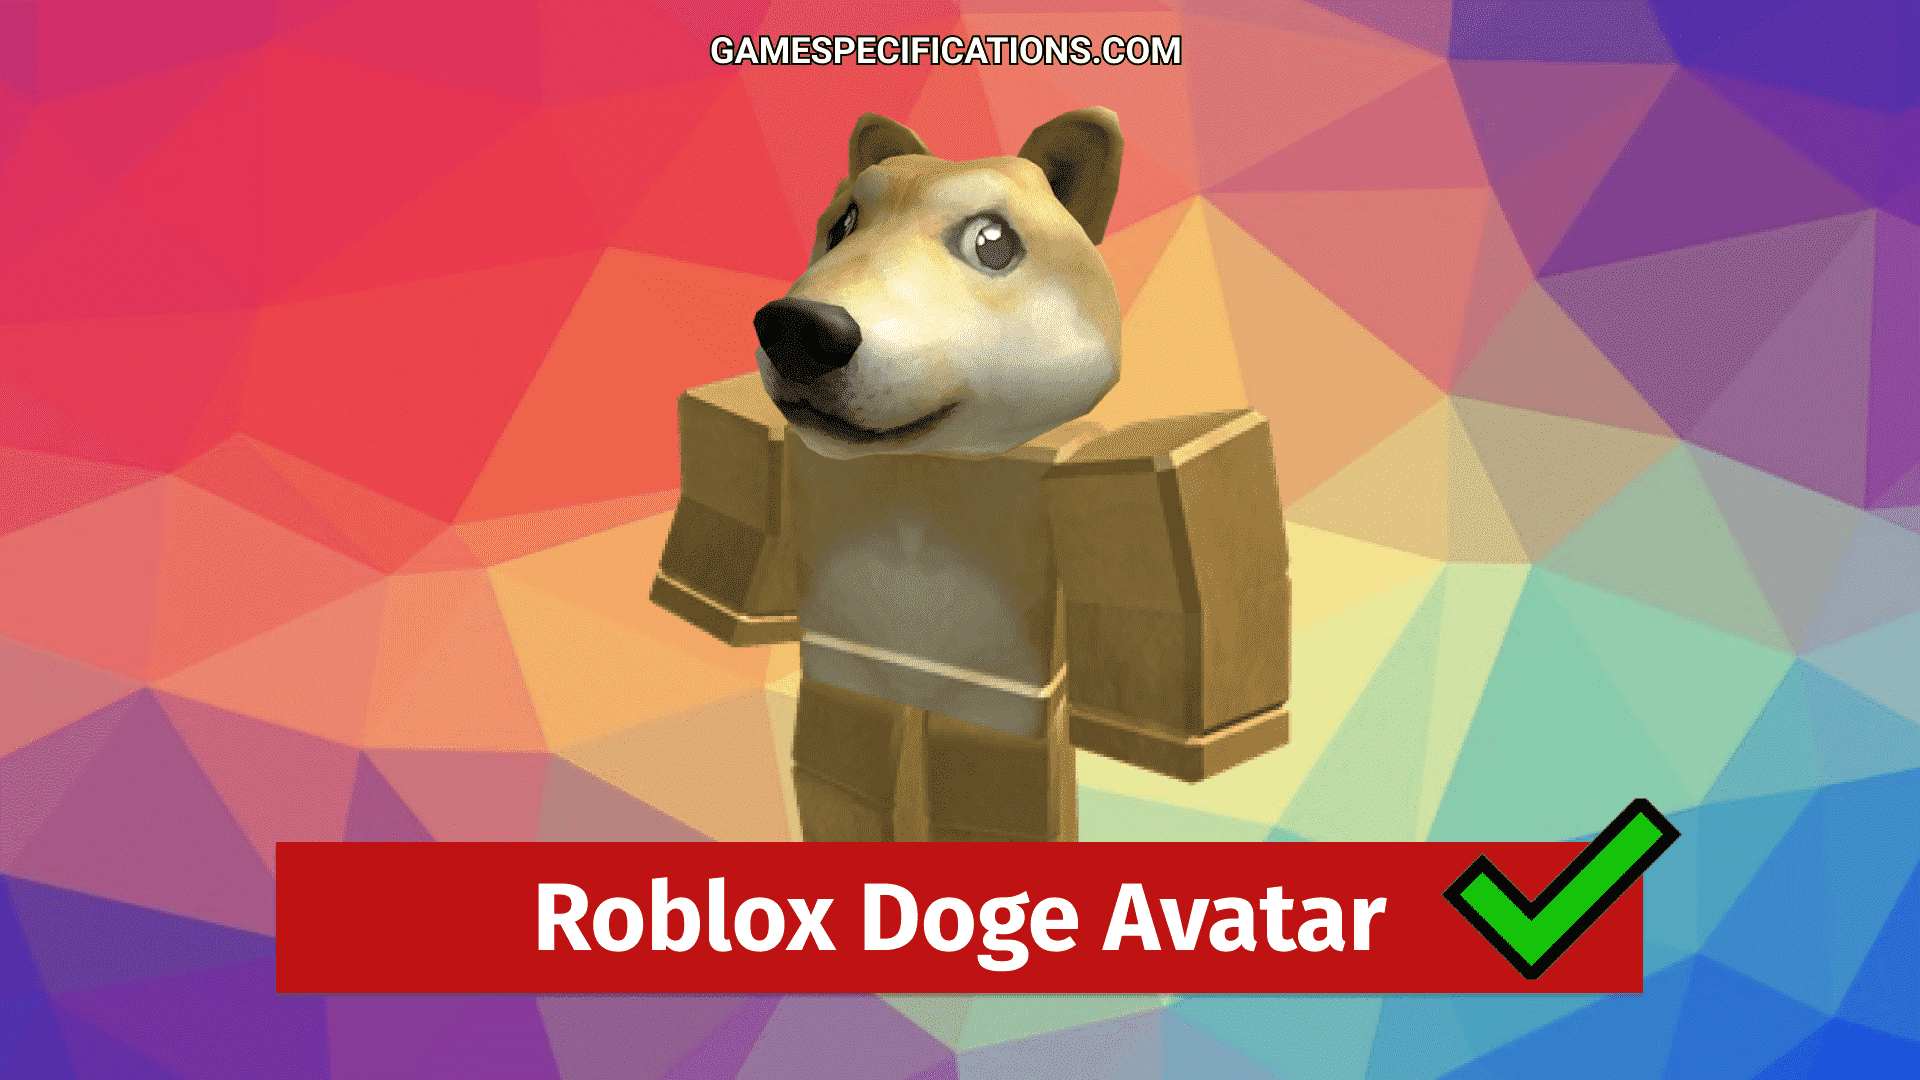 Awesome Roblox Doge Avatar Guide Game Specifications - roblox zombie doge pants